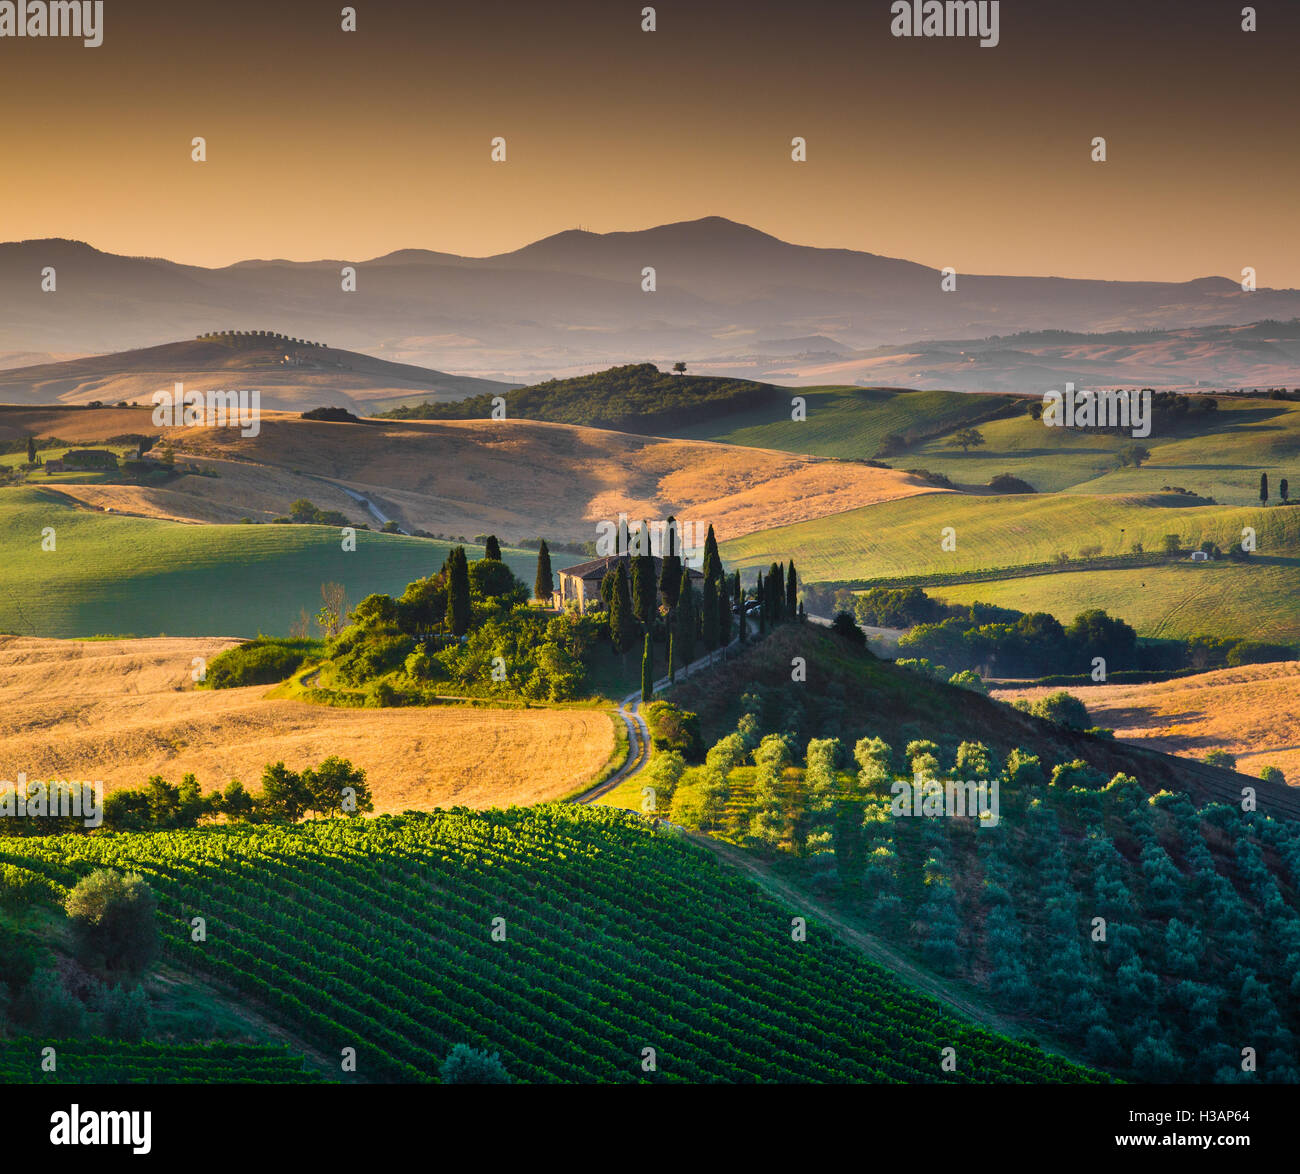 Scenic Tuscany landscape with rolling hills and valleys in golden morning light, Val d'Orcia, Italy Stock Photo